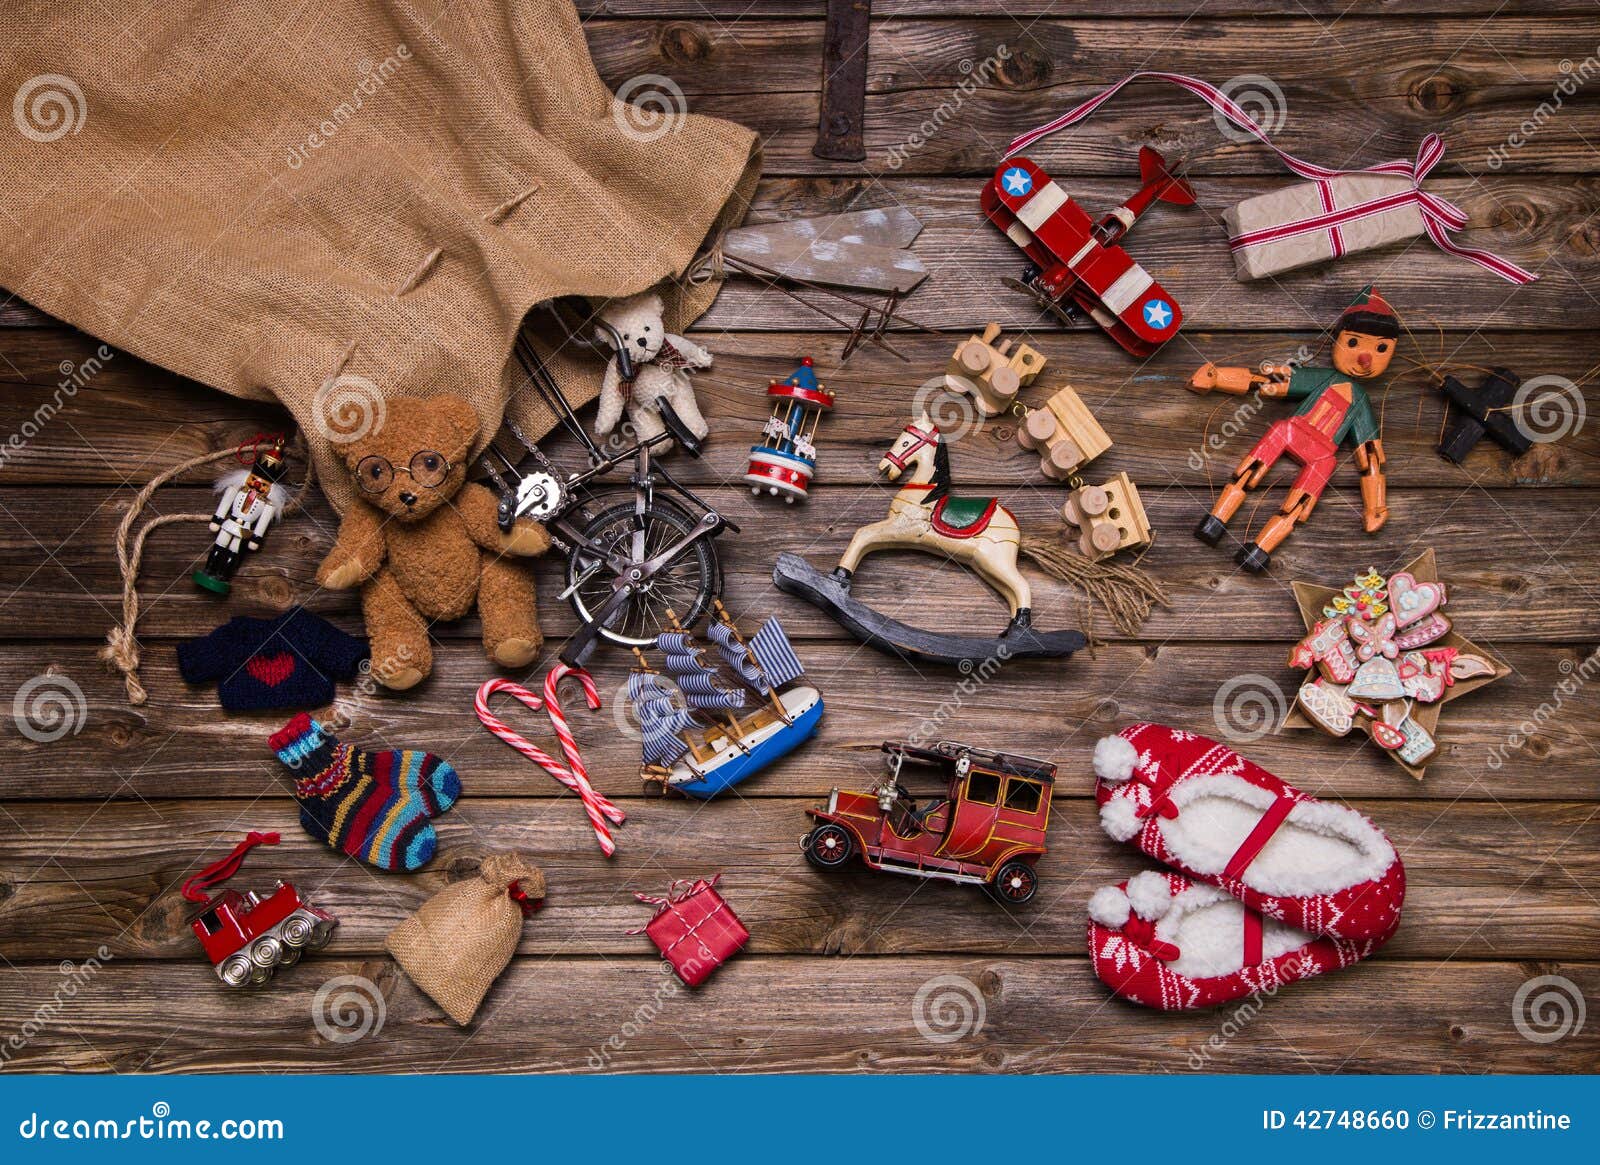 christmas memories in childhood: old and tin toys on wooden back